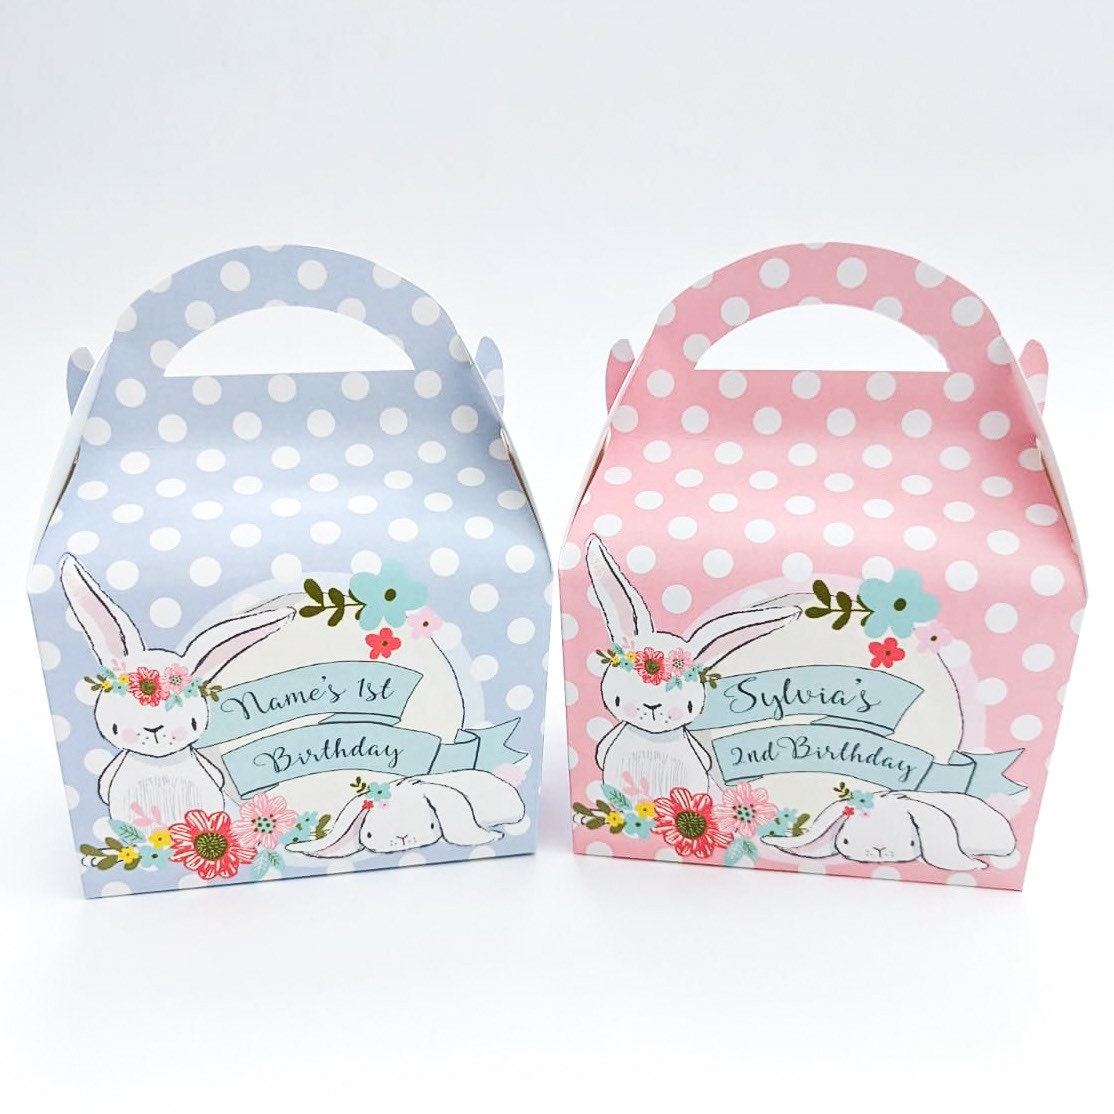 Bunny Rabbit Floral balloons Personalised Children’s Party Box Gift Bag Favour